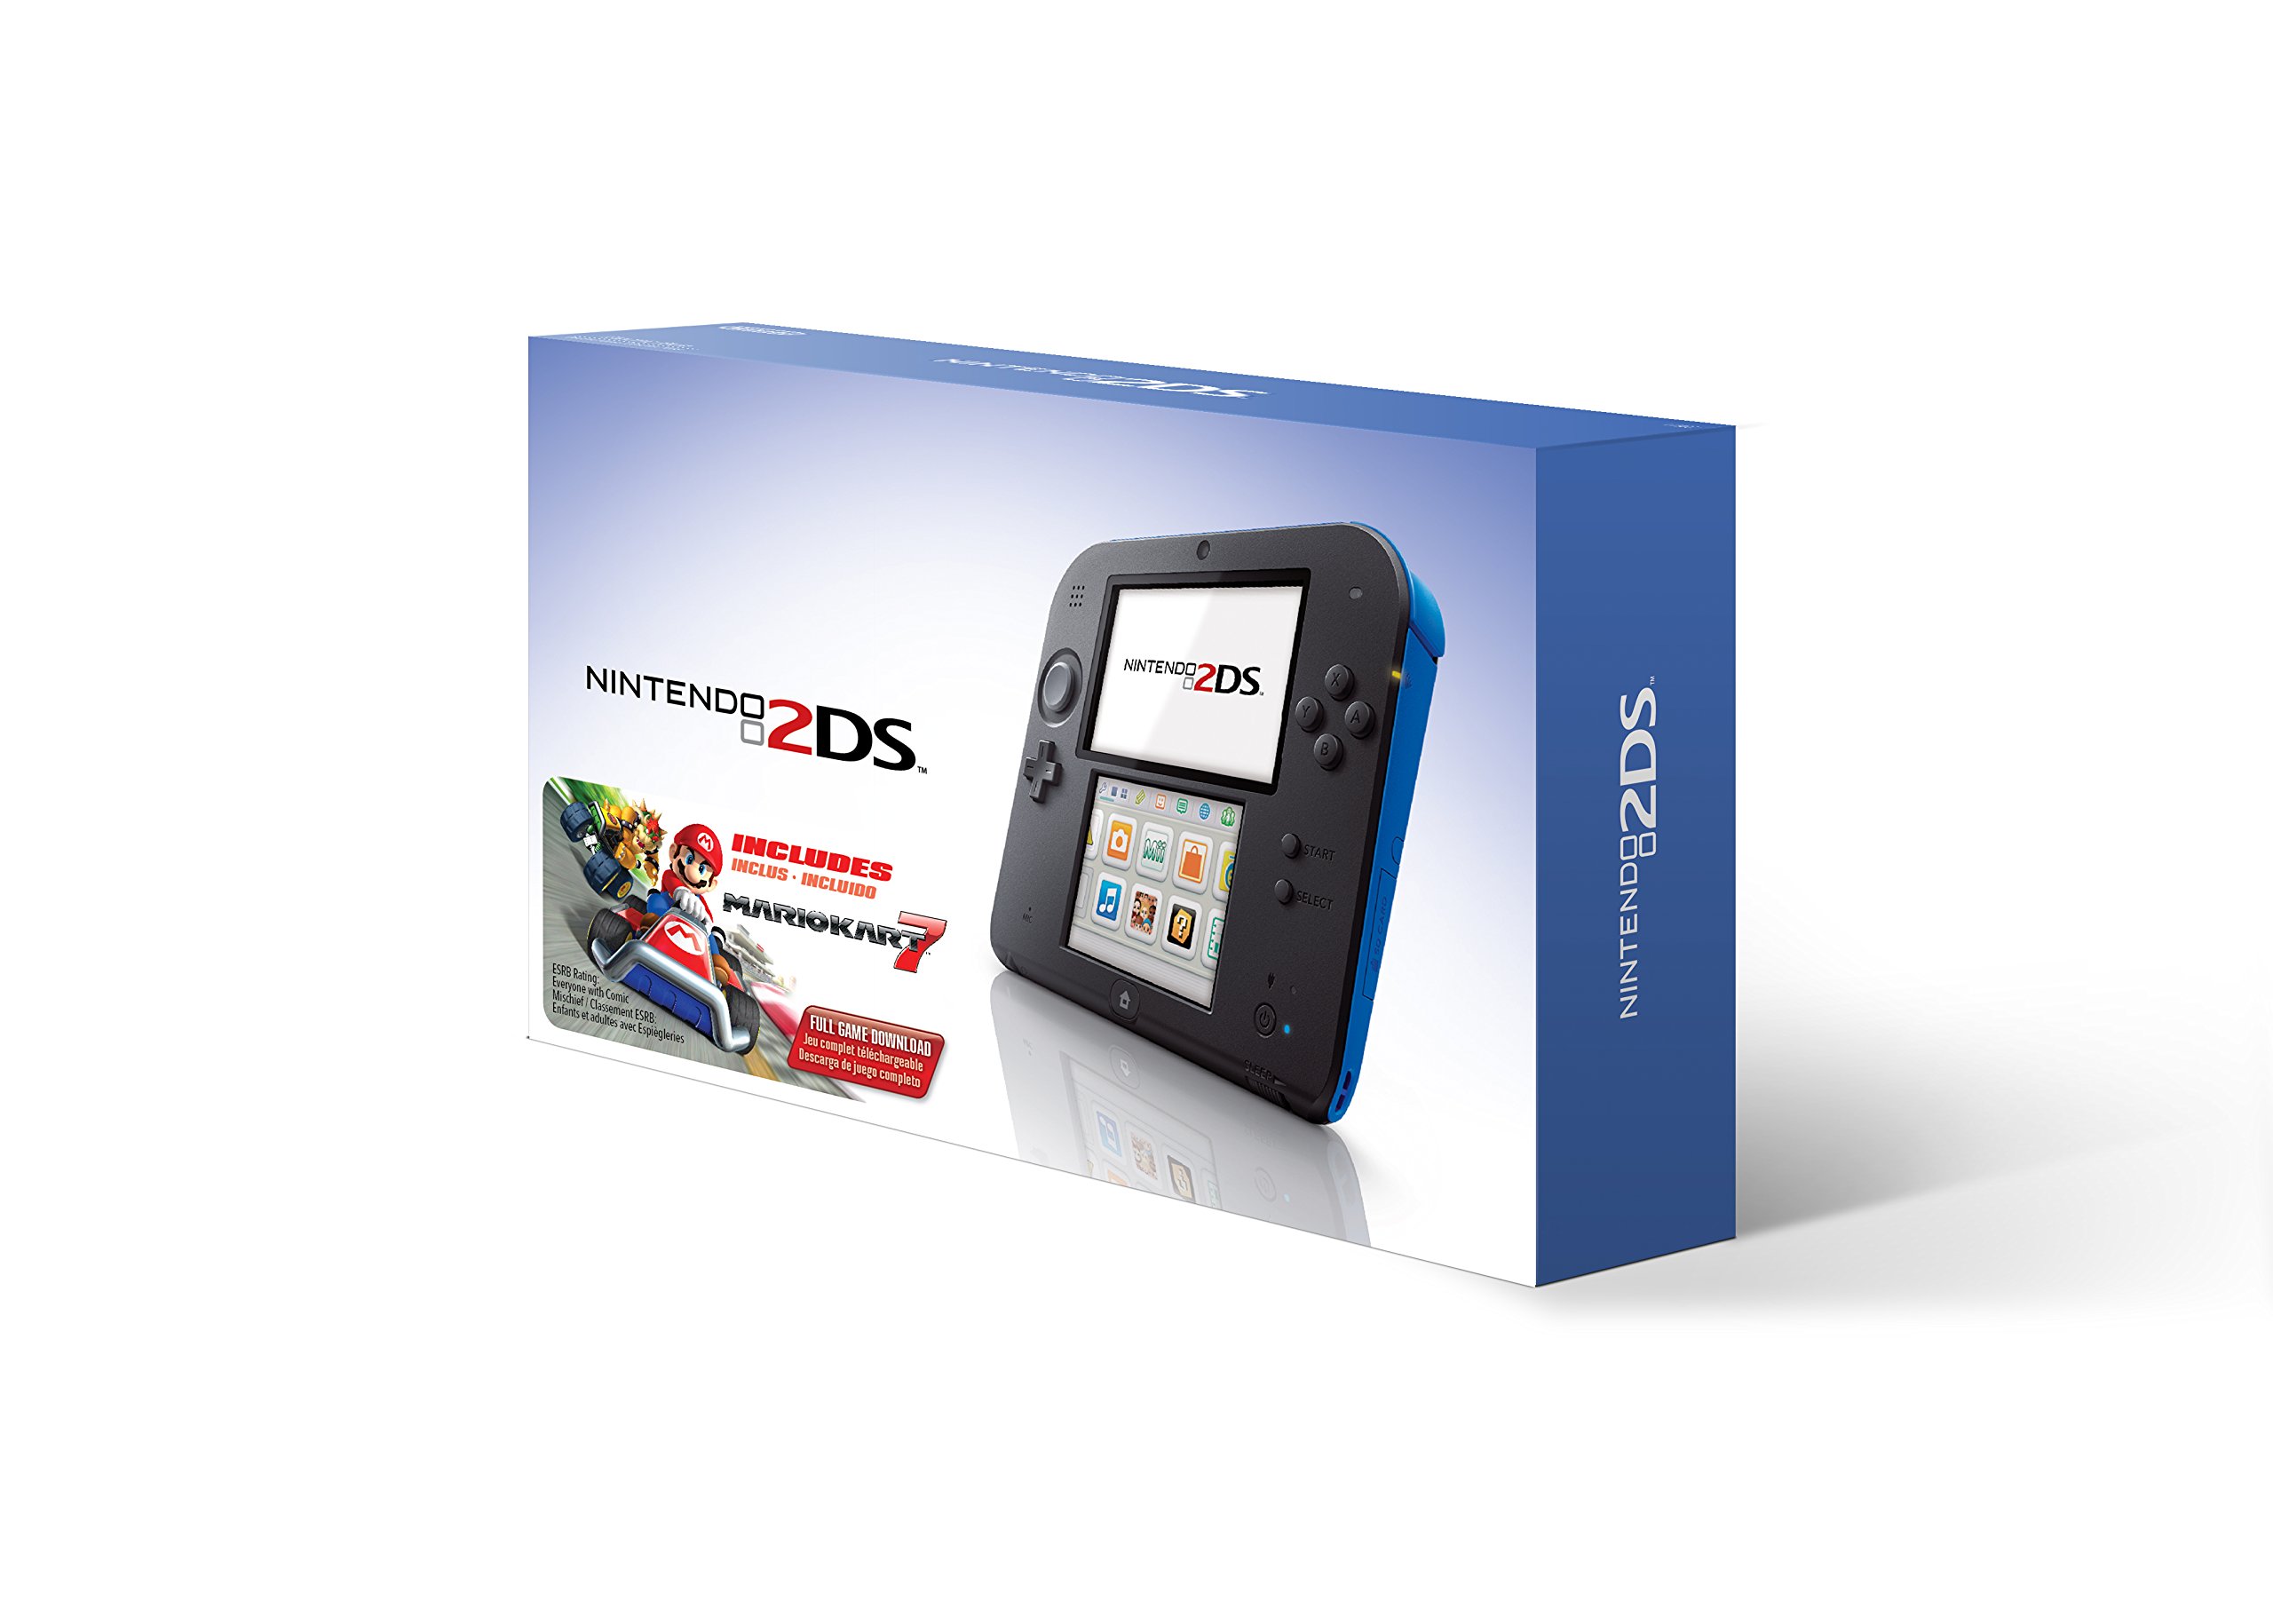 Nintendo 2DS Handheld System with Mario Kart 7 - Electric Blue